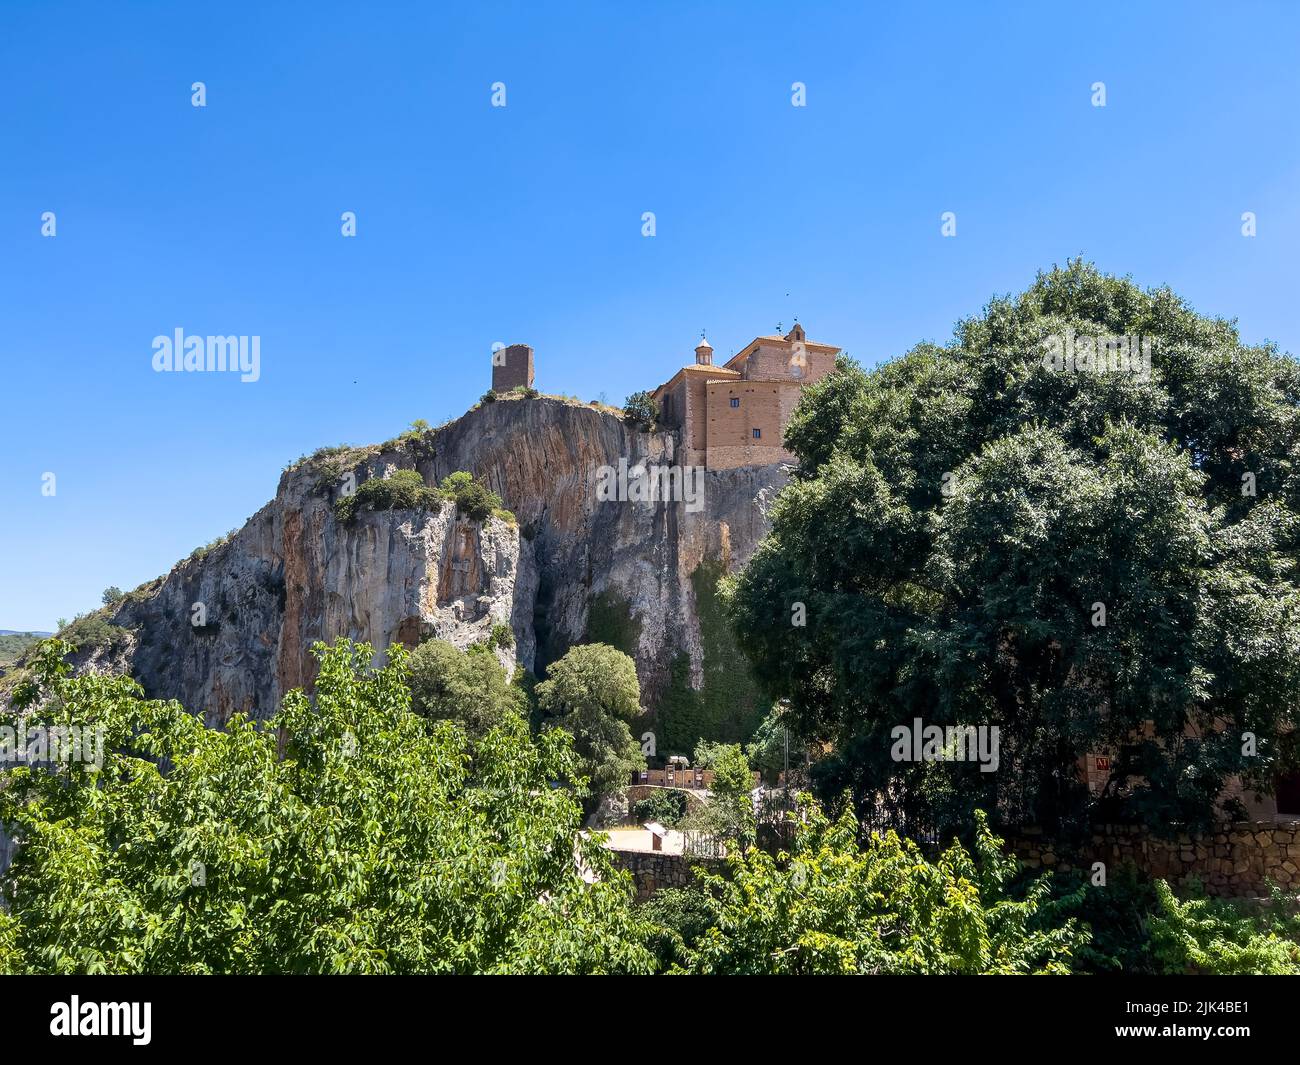 looking up at a religious building built on rock foundations Stock Photo